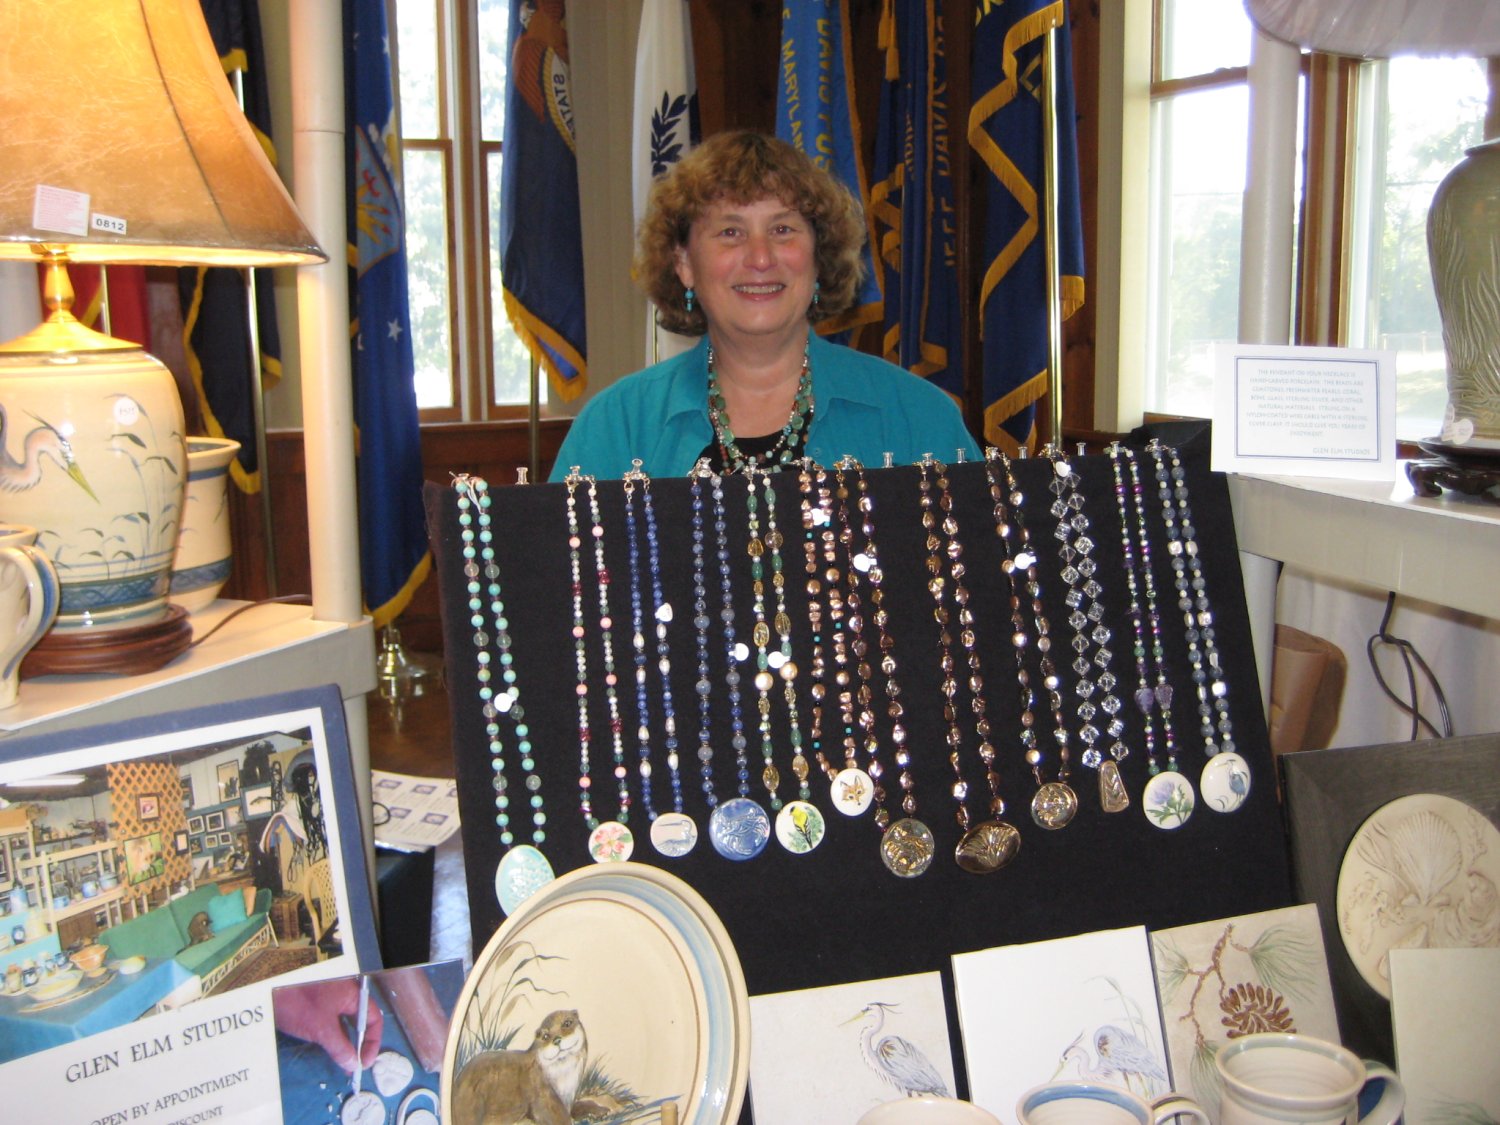  Jean Higgins with her handcrafted pendants.  